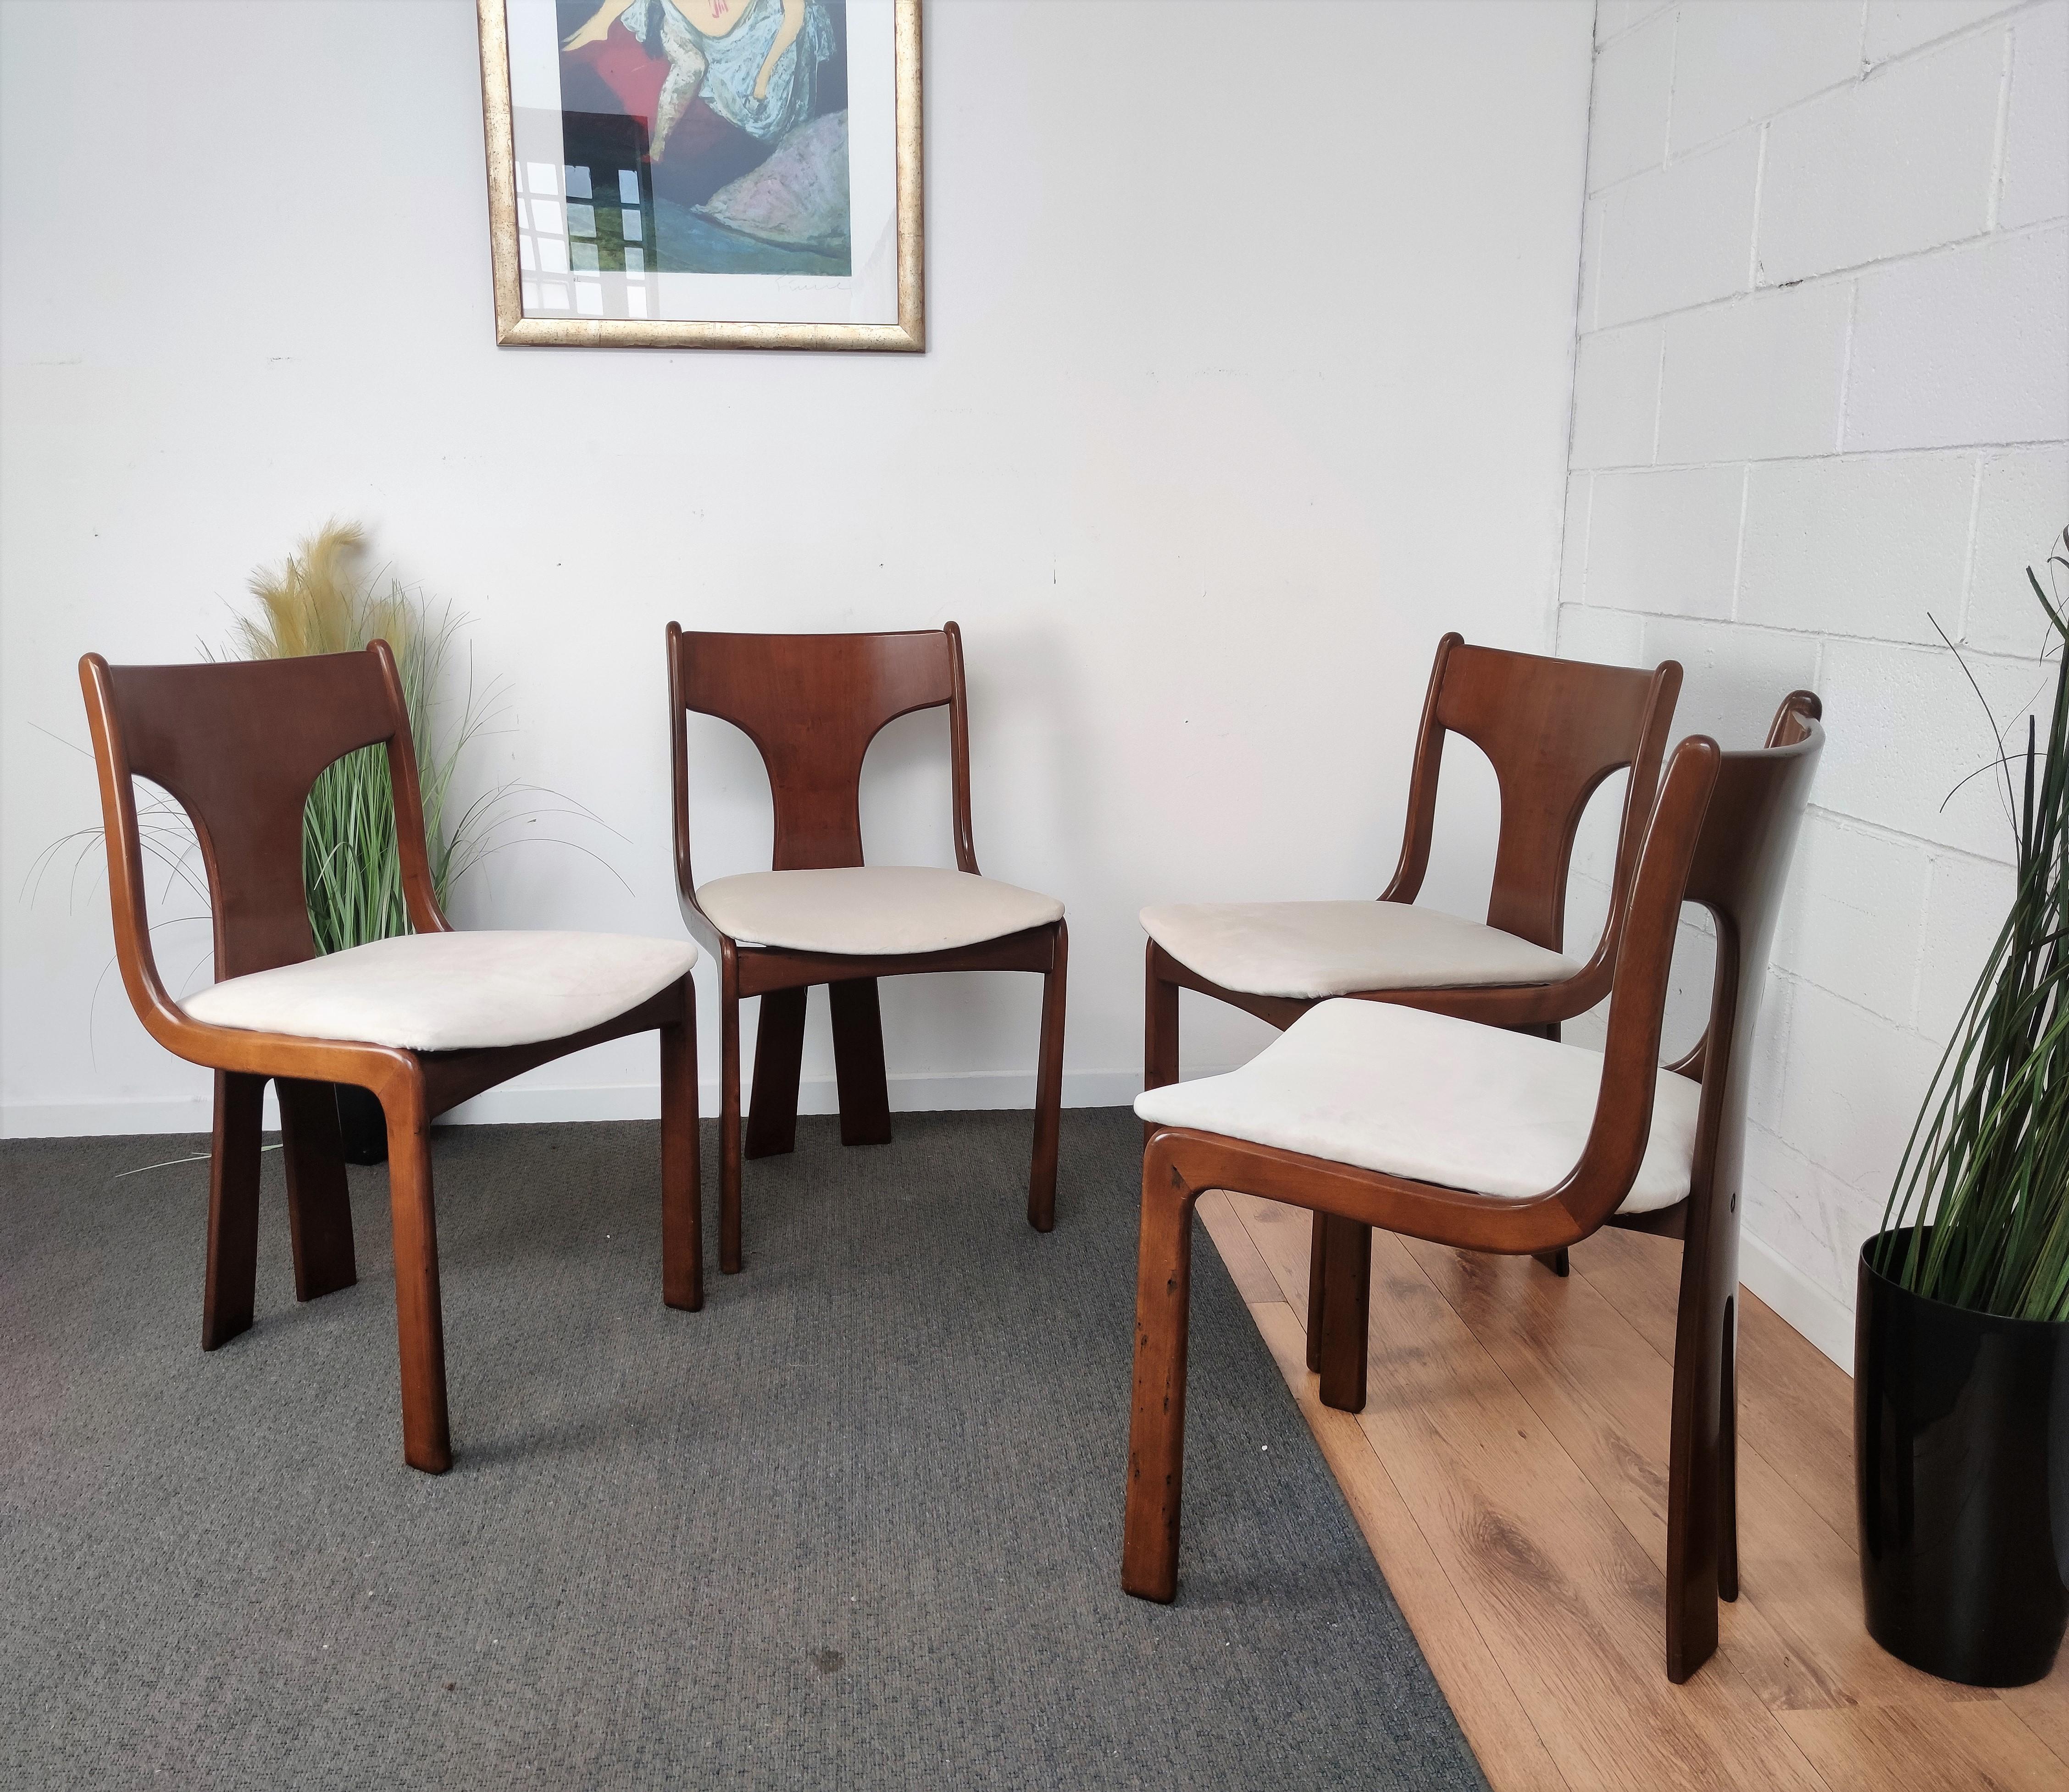 20th Century Four 1950s Italian Mid-Century Modern Newly Upholstered Dining Room Chairs